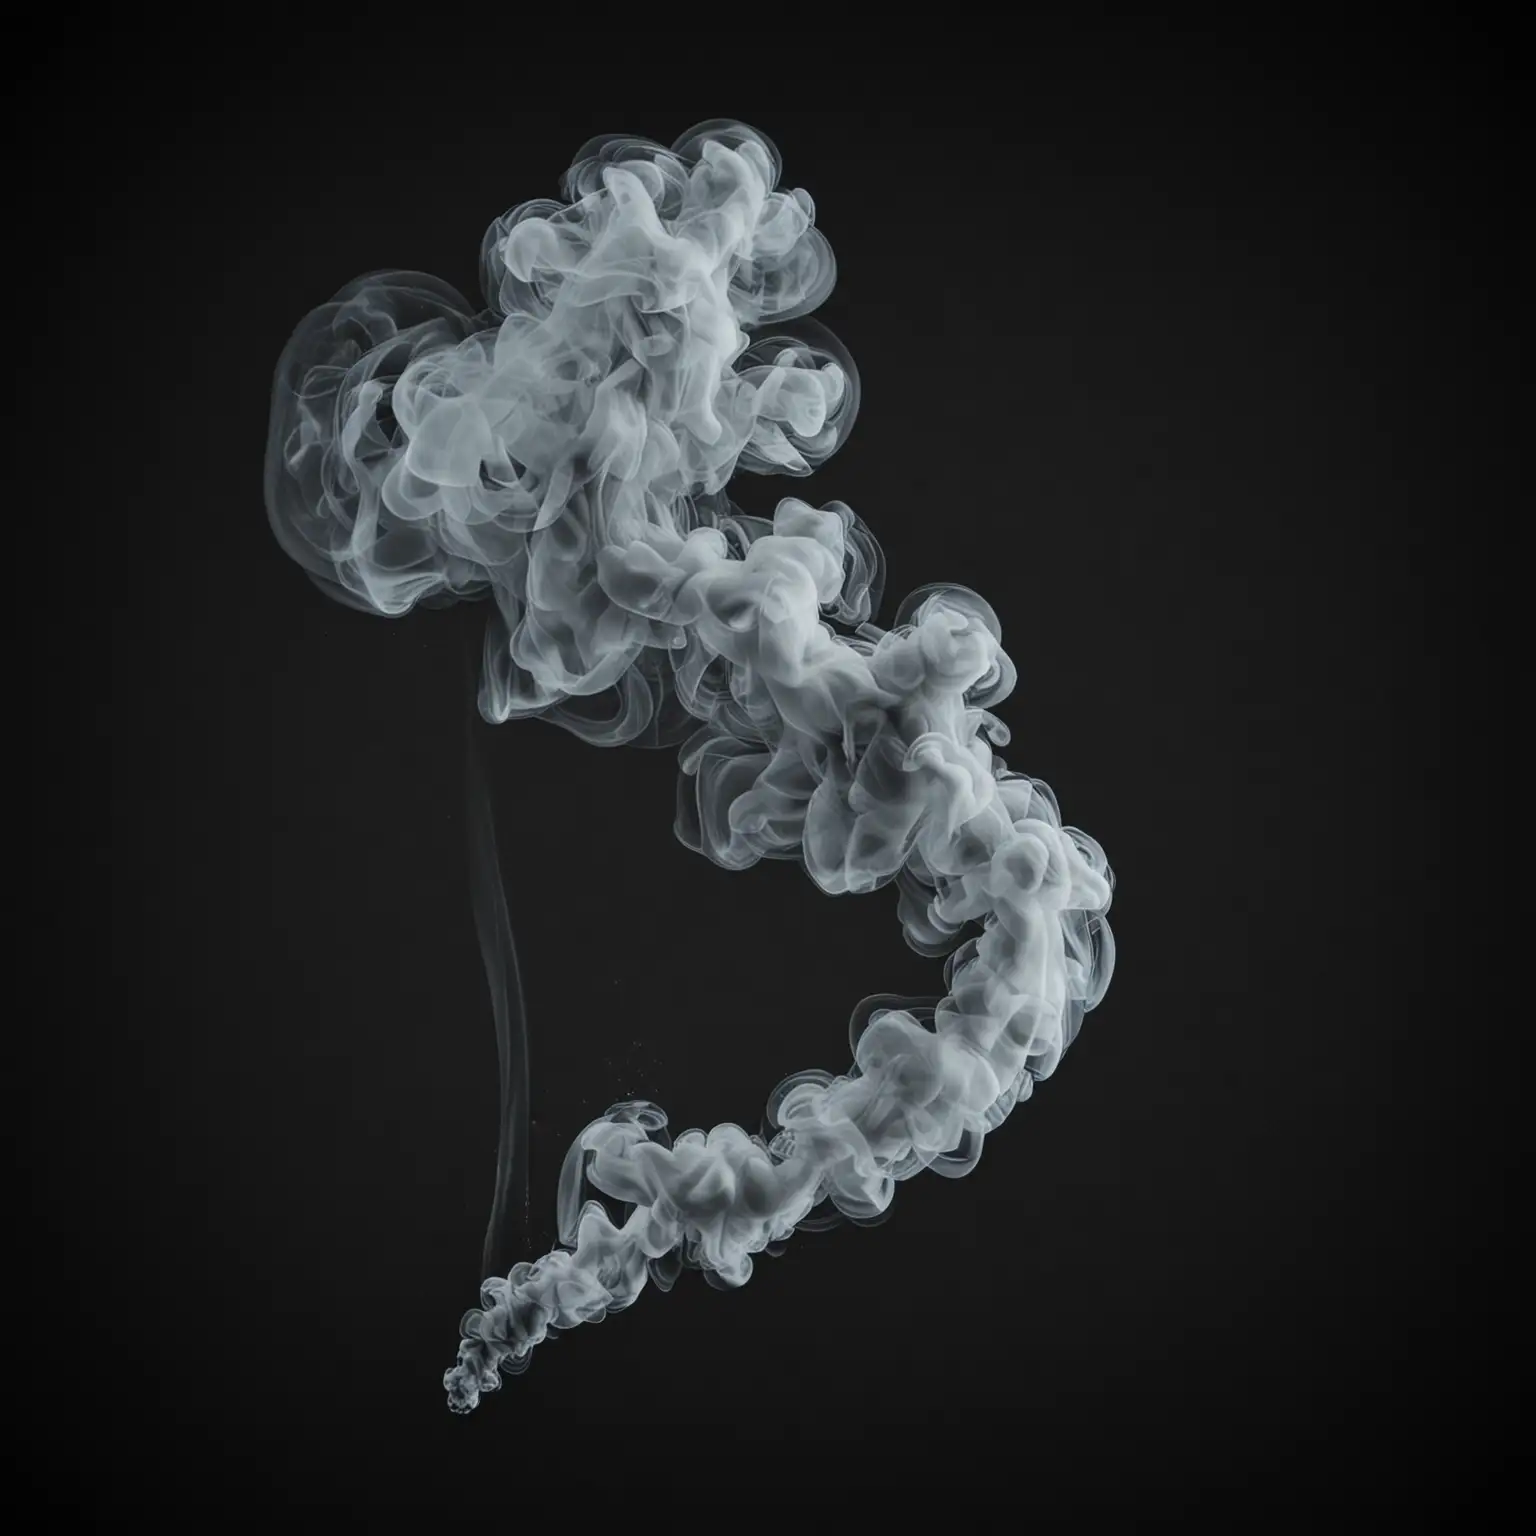 ULTRA REALISTIC SMOKE TRAIL ISOLATED ON A BLACK BACKGROUND